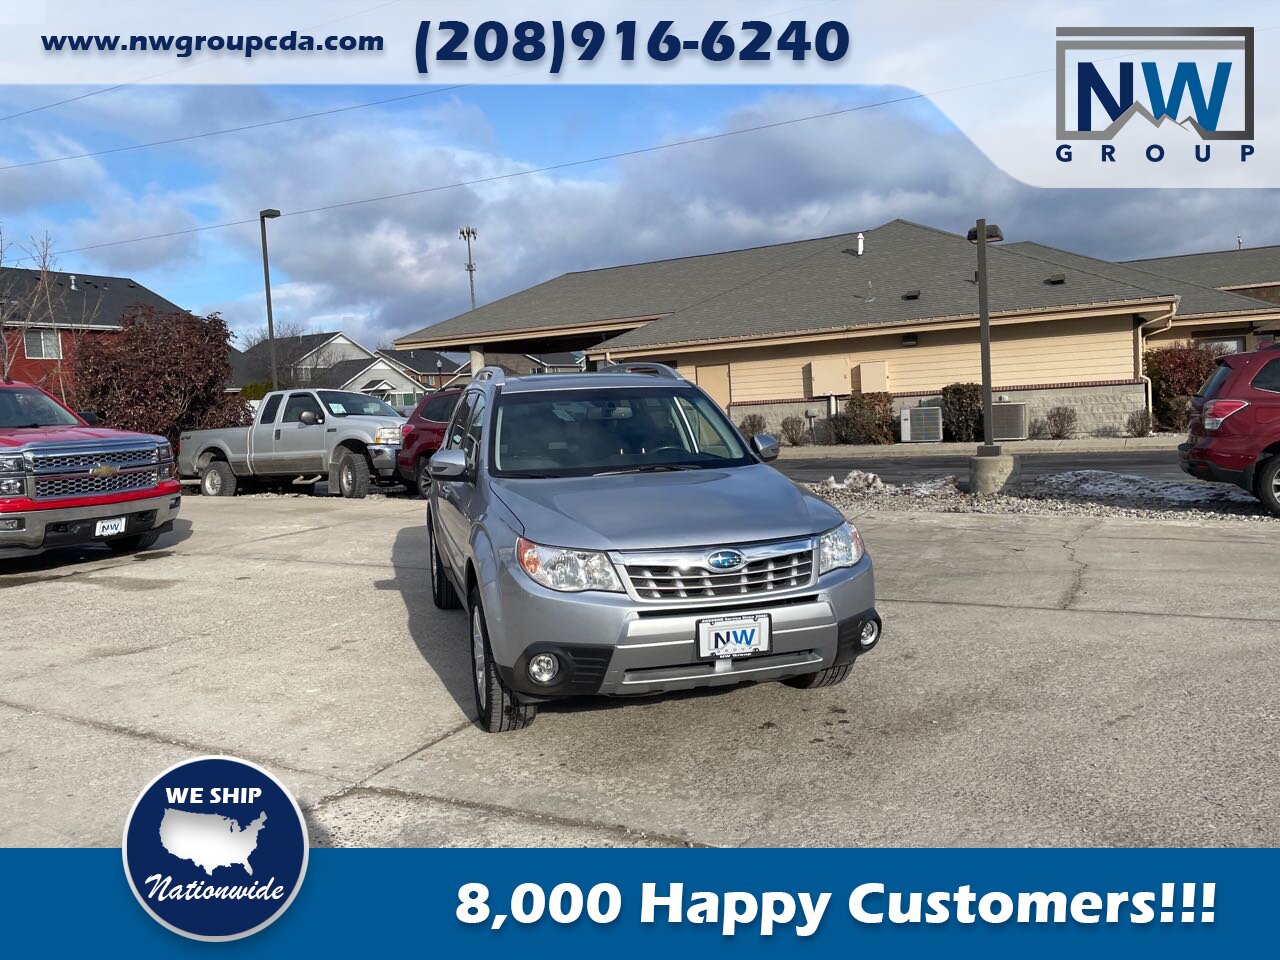 2013 Subaru Forester 2.5X Touring Package  Original 37k miles, AWD, Leather, Amazing! - Photo 2 - Post Falls, ID 83854